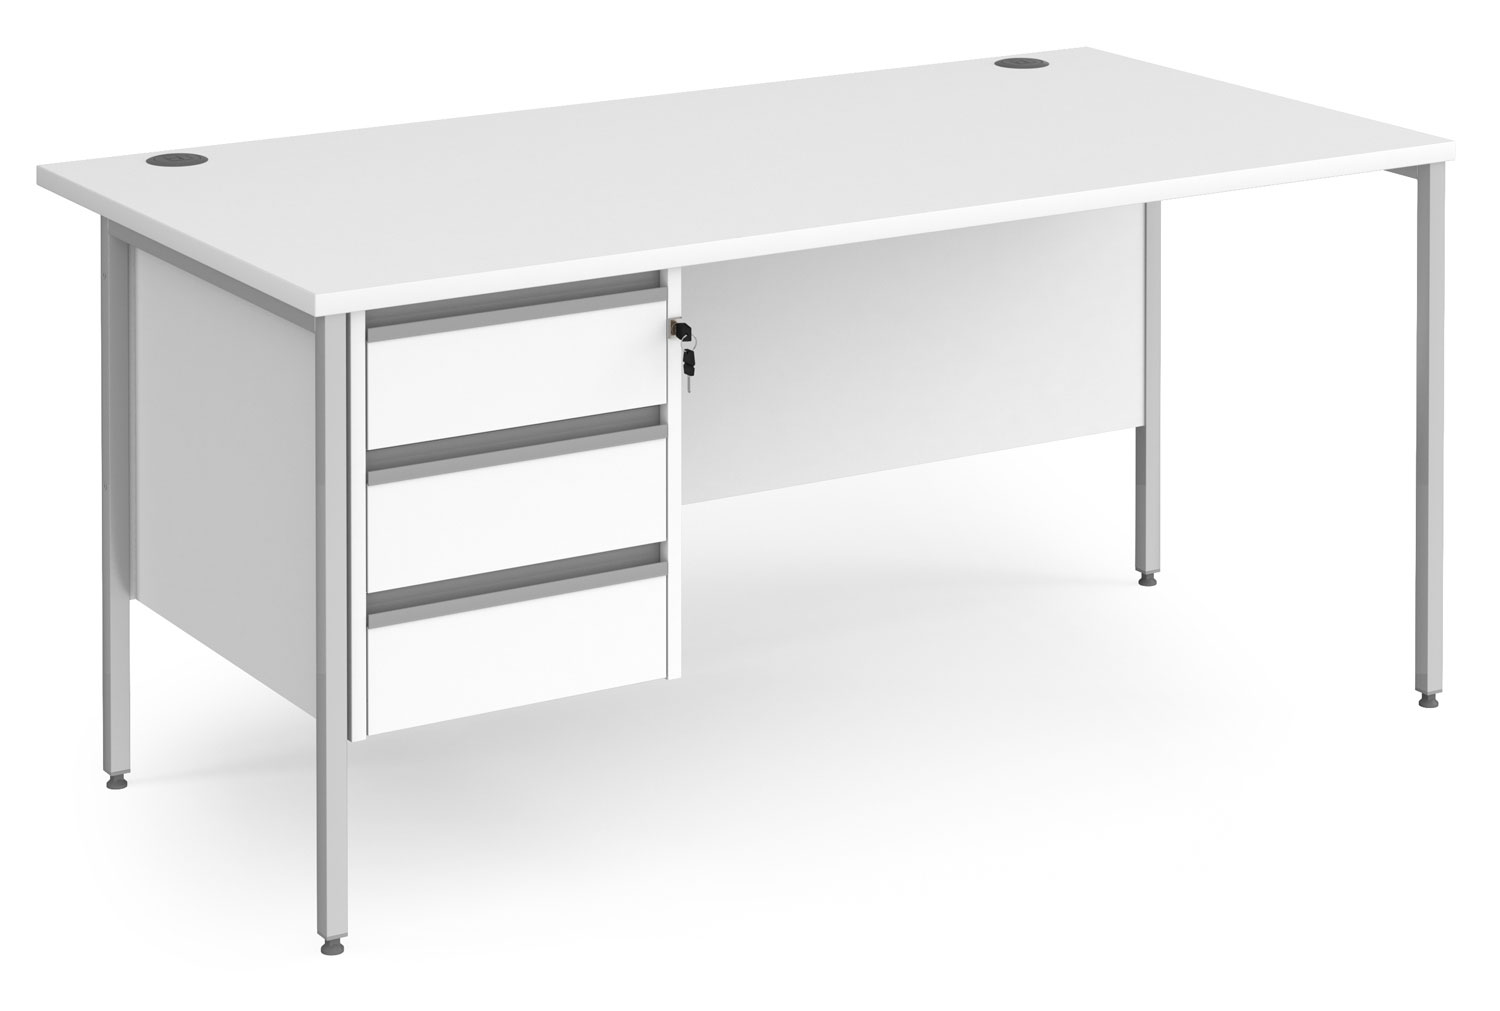 Value Line Classic+ Rectangular H-Leg Office Desk 3 Drawers (Silver Leg), 160wx80dx73h (cm), White, Express Delivery